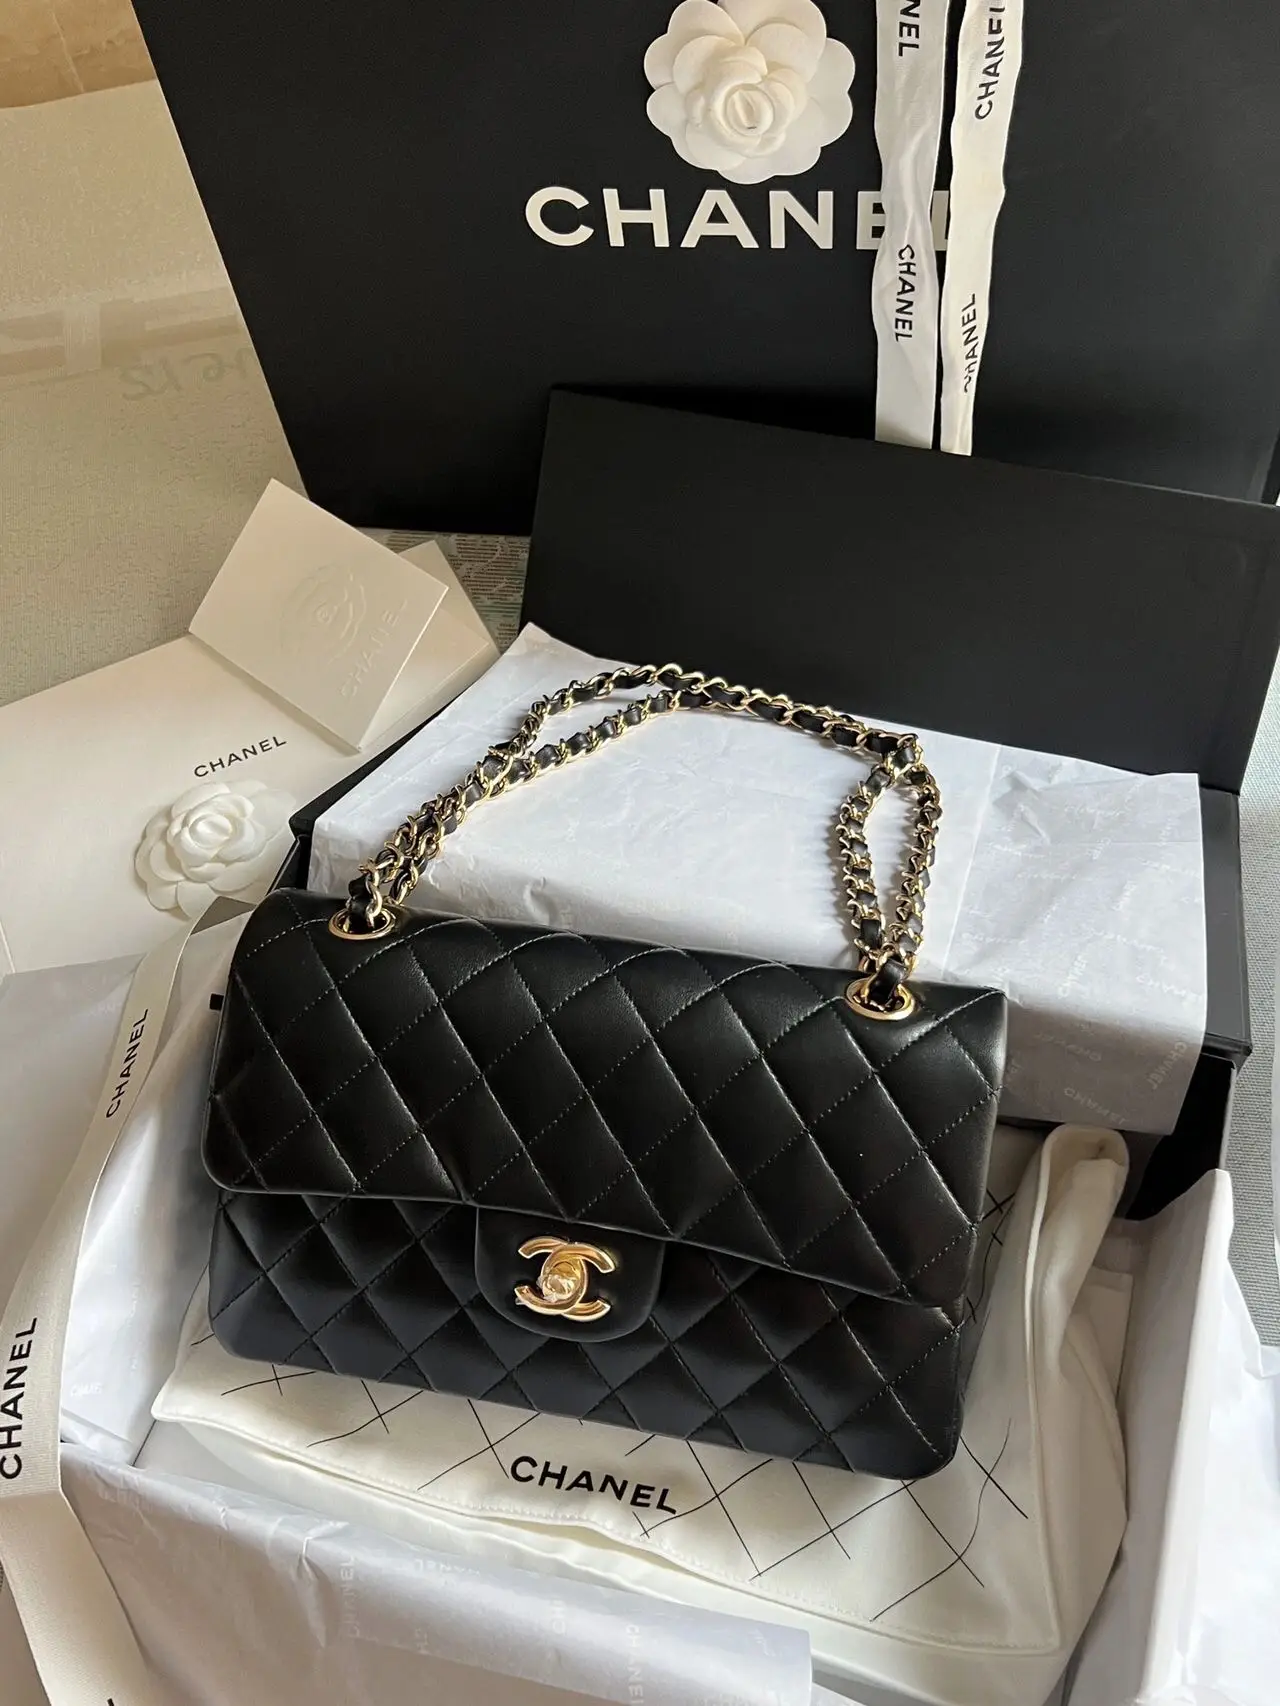 Chanel cf small, life's first Chanel bag